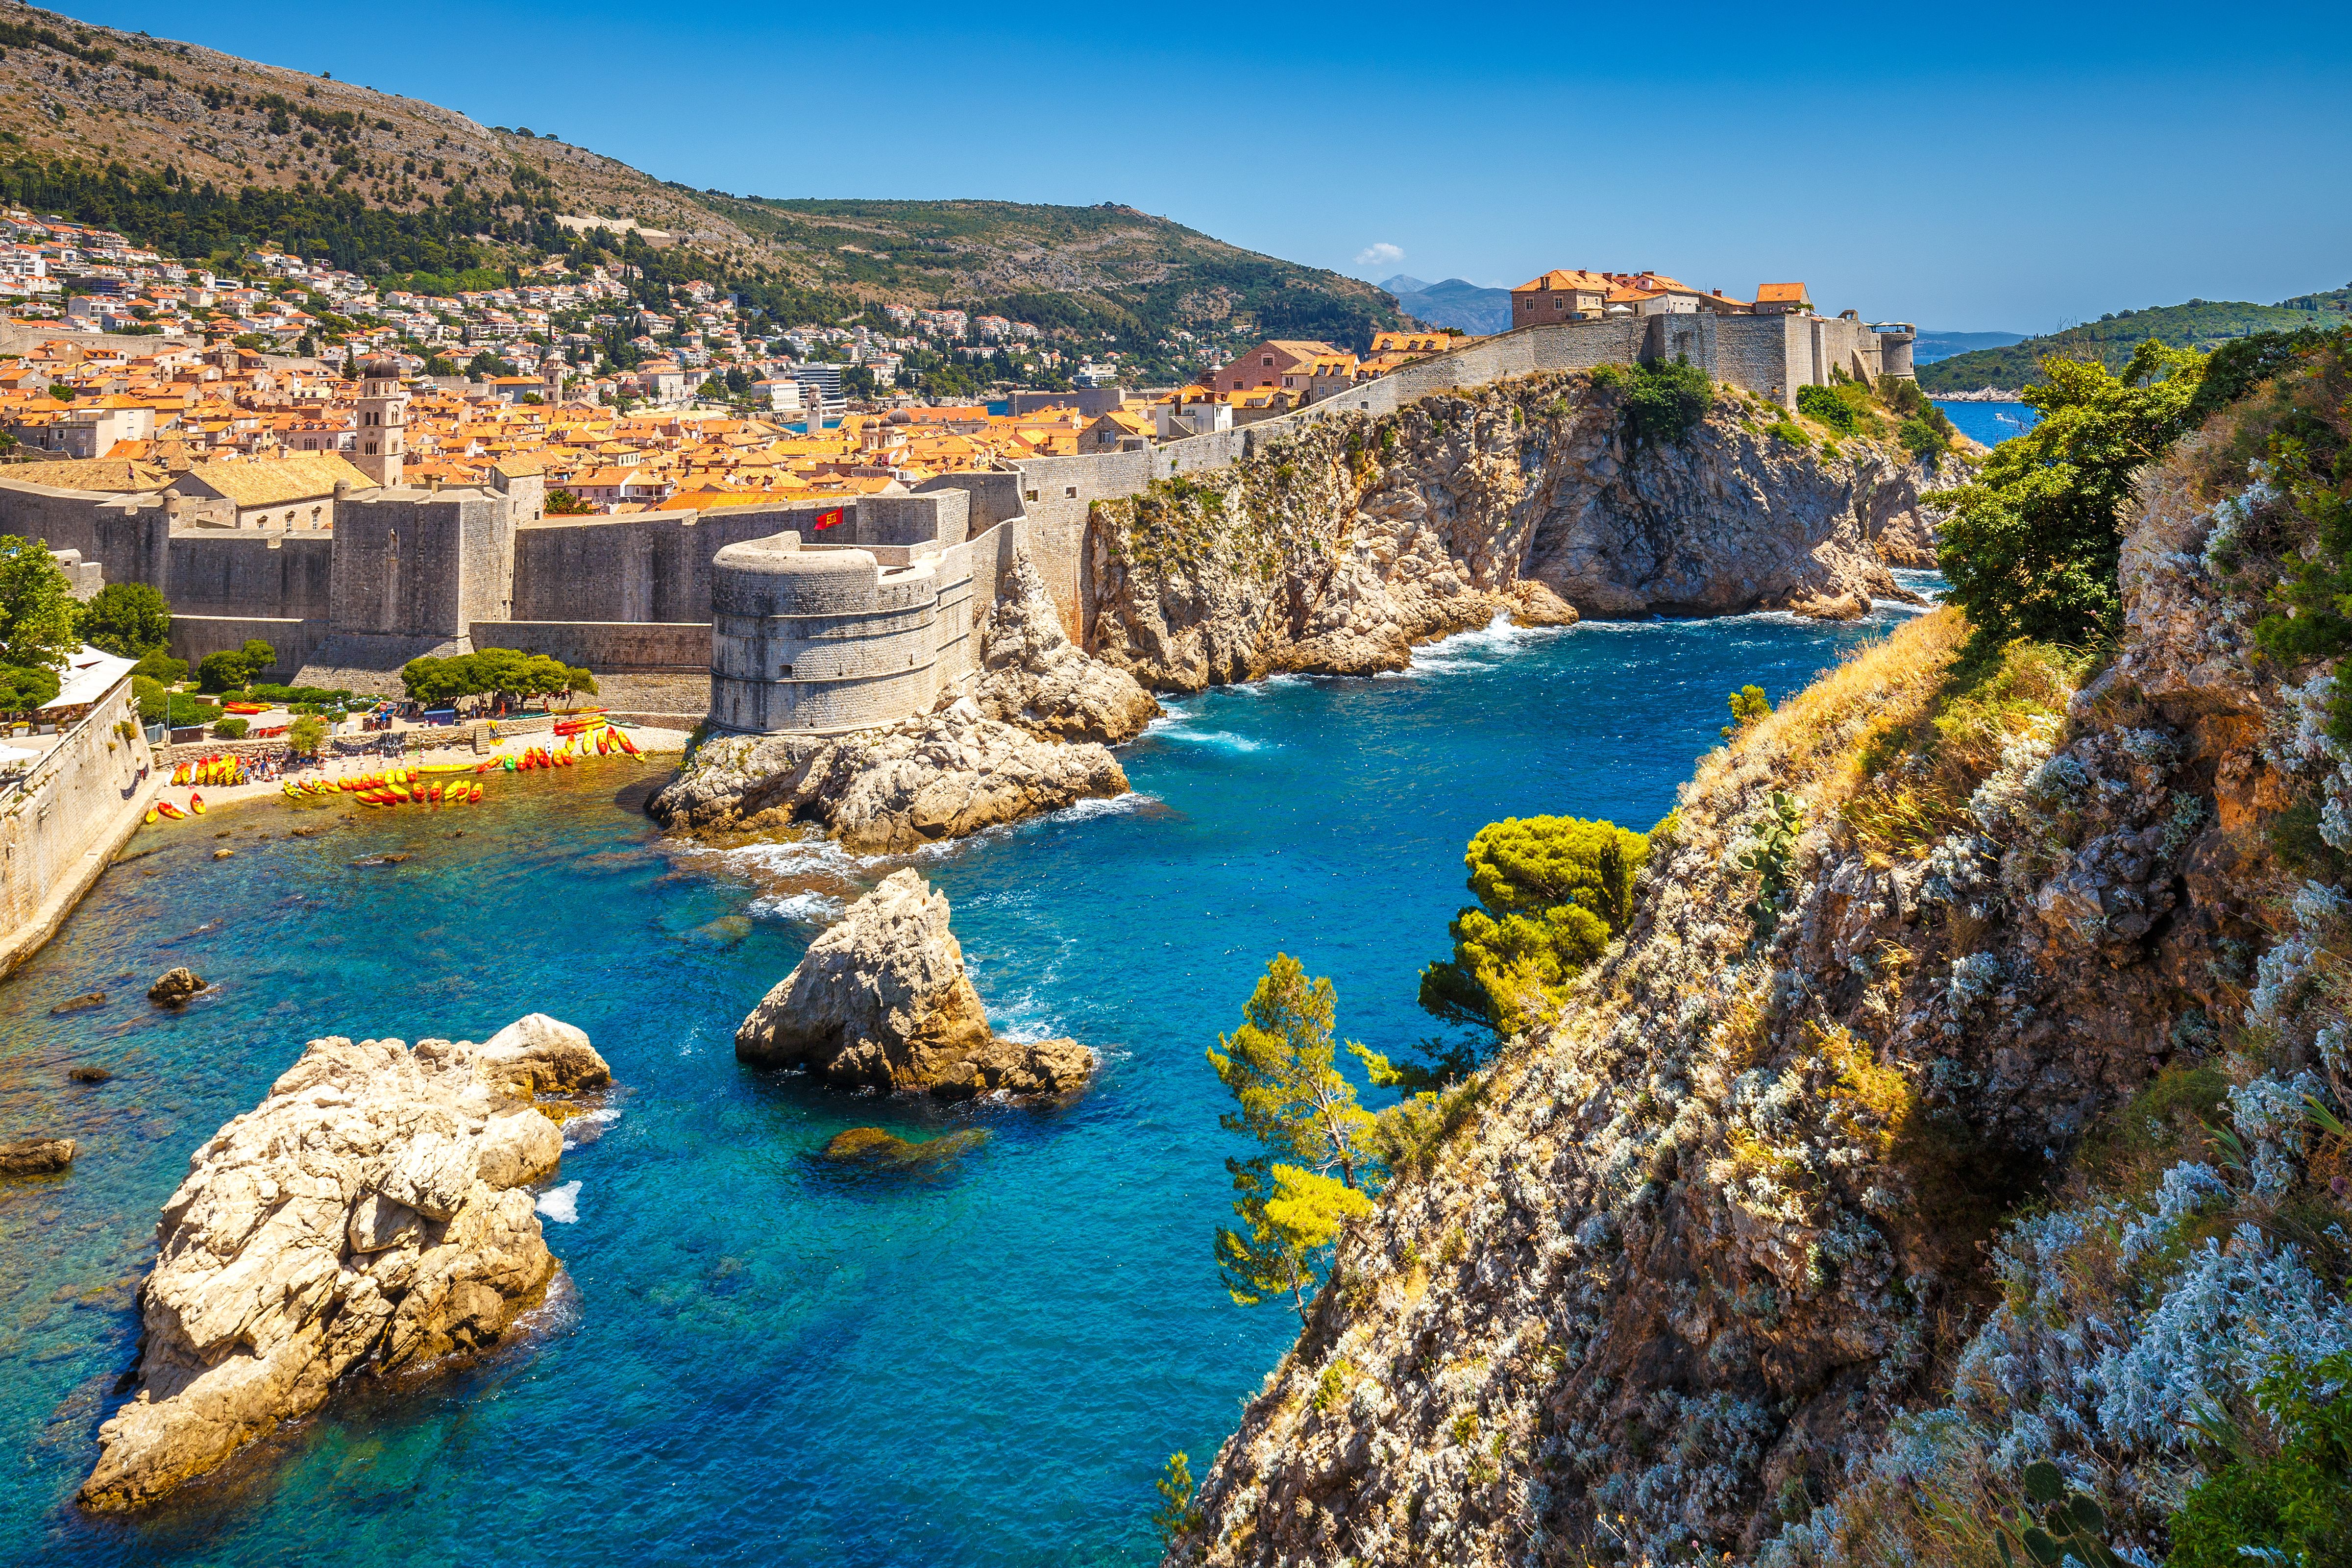 City Walls in the Old Town of Dubrovnik in Croatia